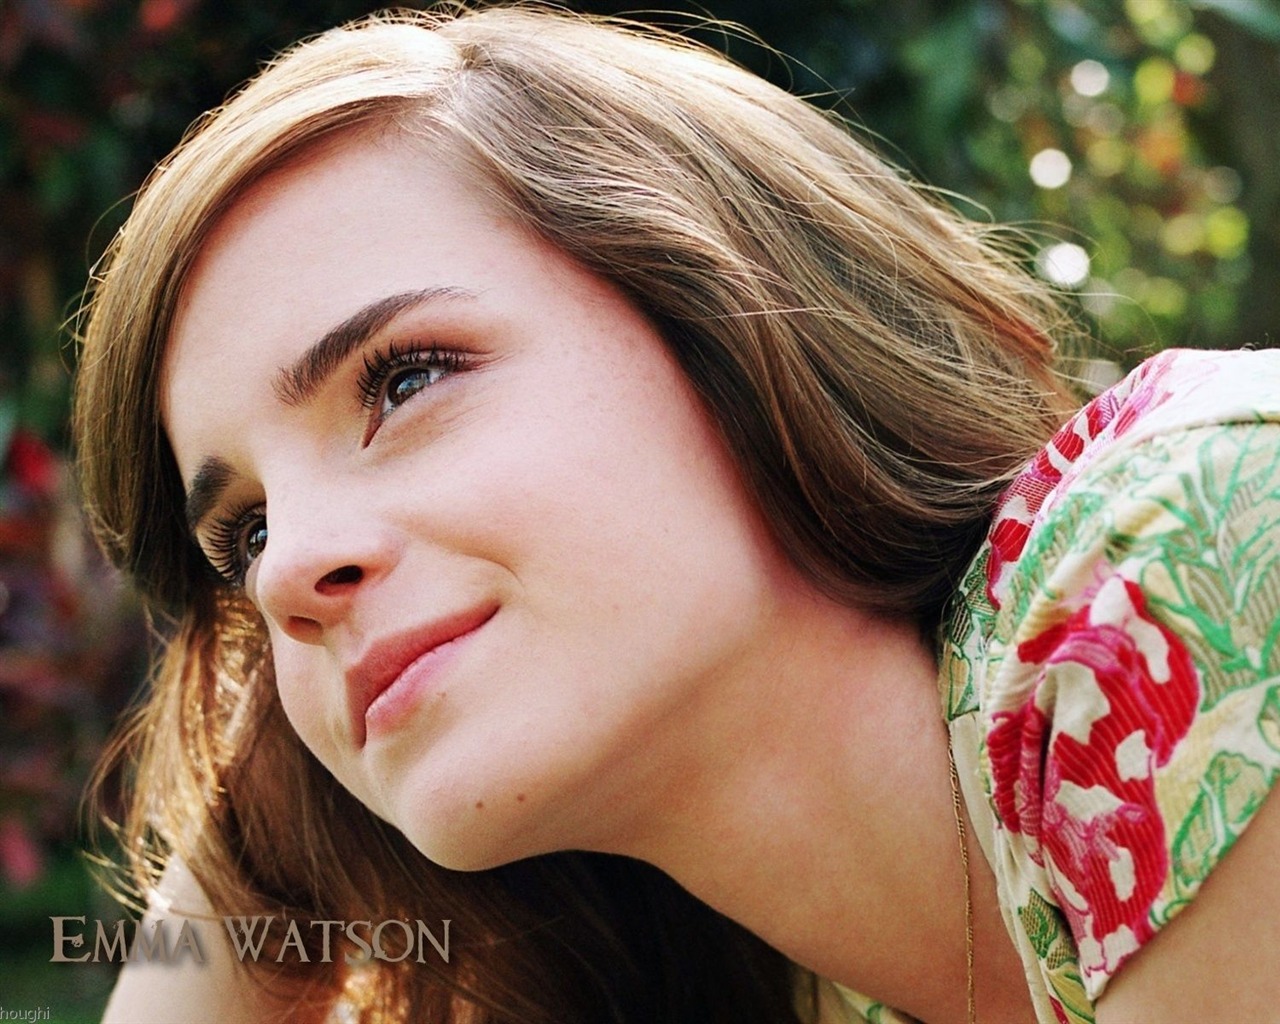 Emma Watson #026 - 1280x1024 Wallpapers Pictures Photos Images